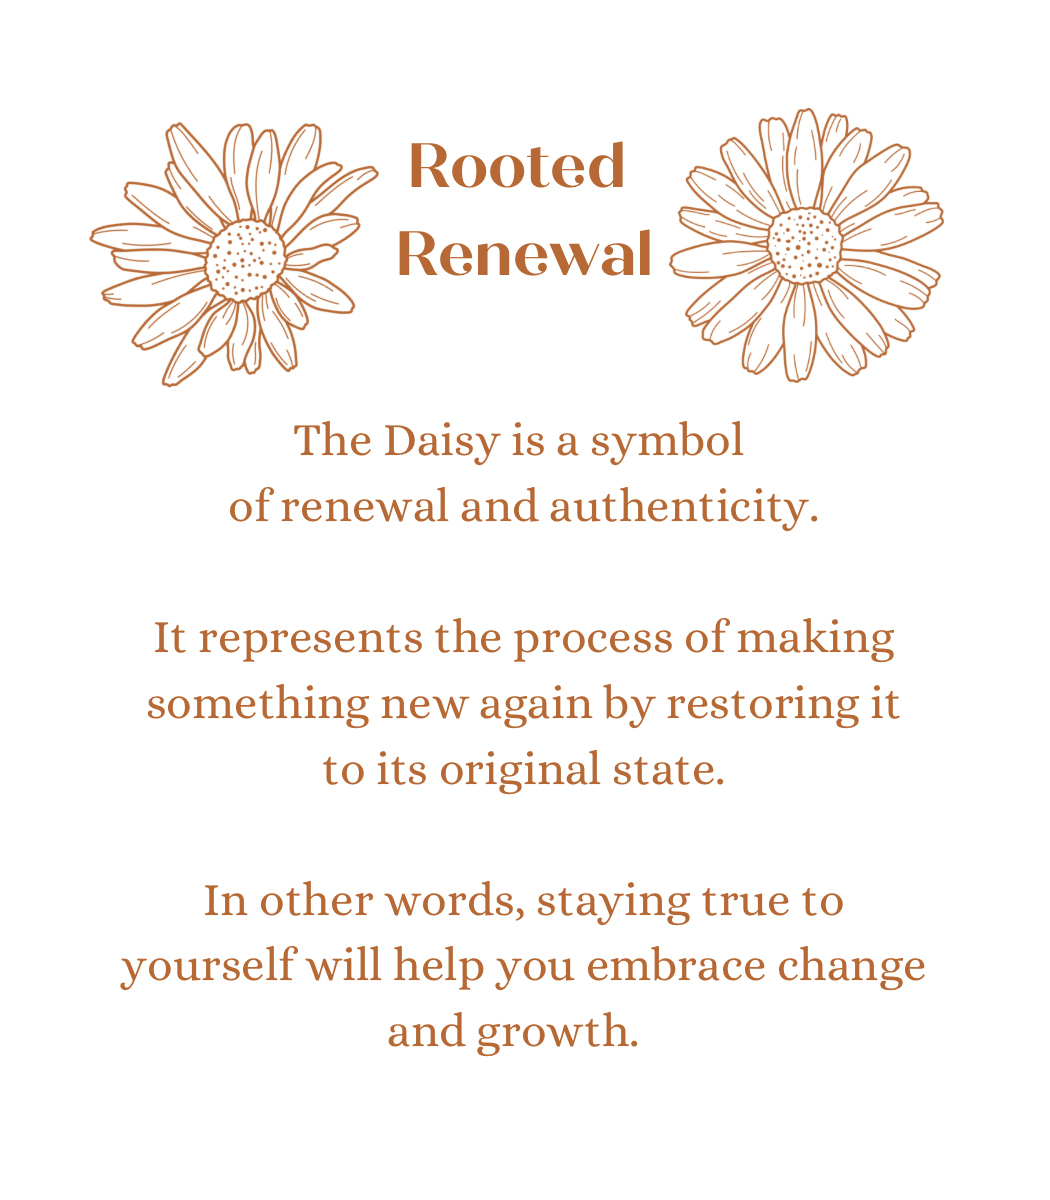 Rooted Renewal in Hera